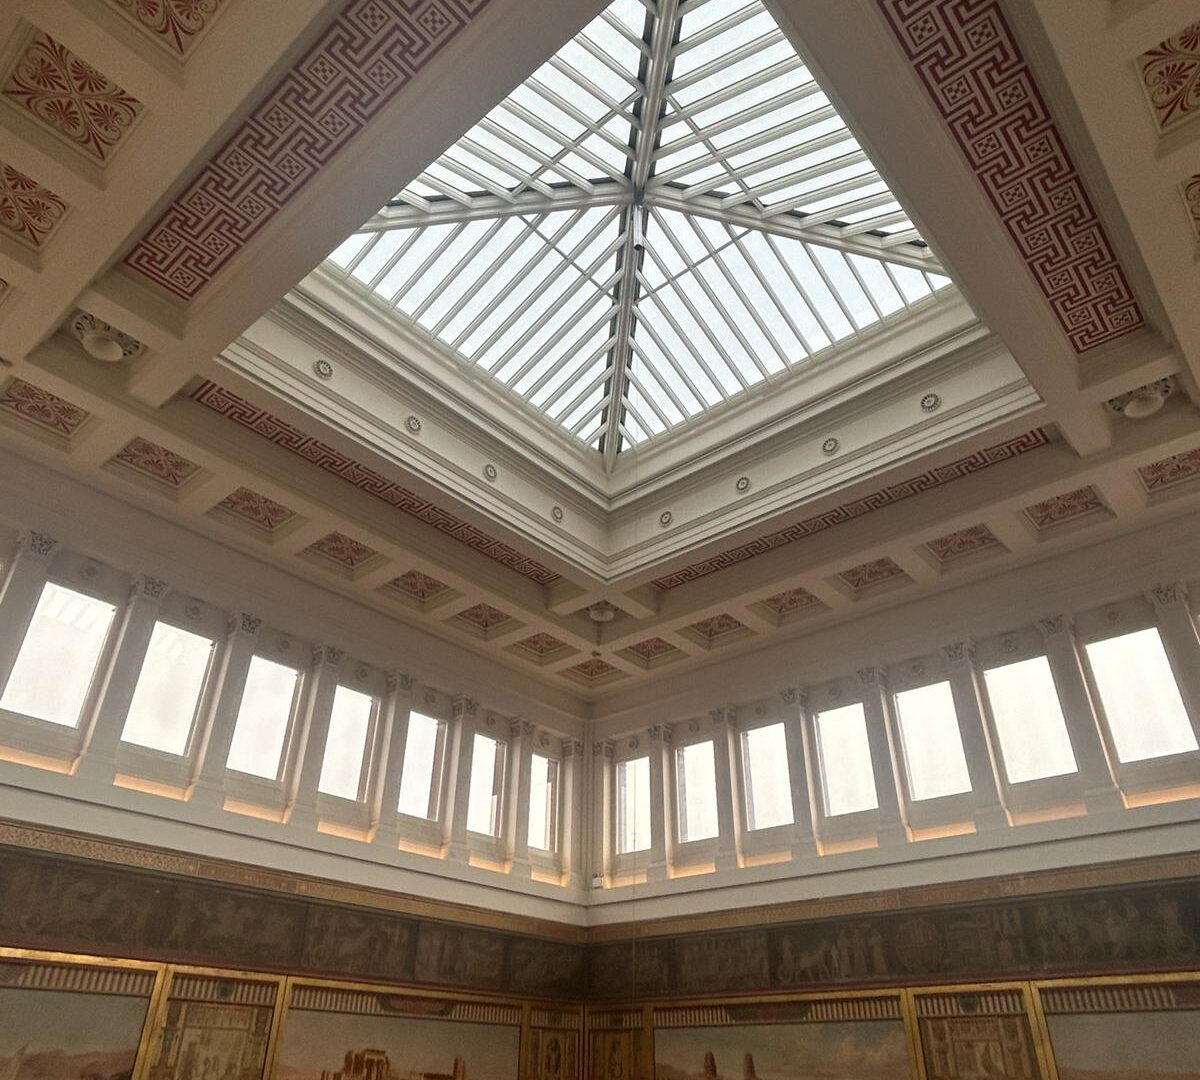 Image of The Harris roof with a pyramid glass roof.